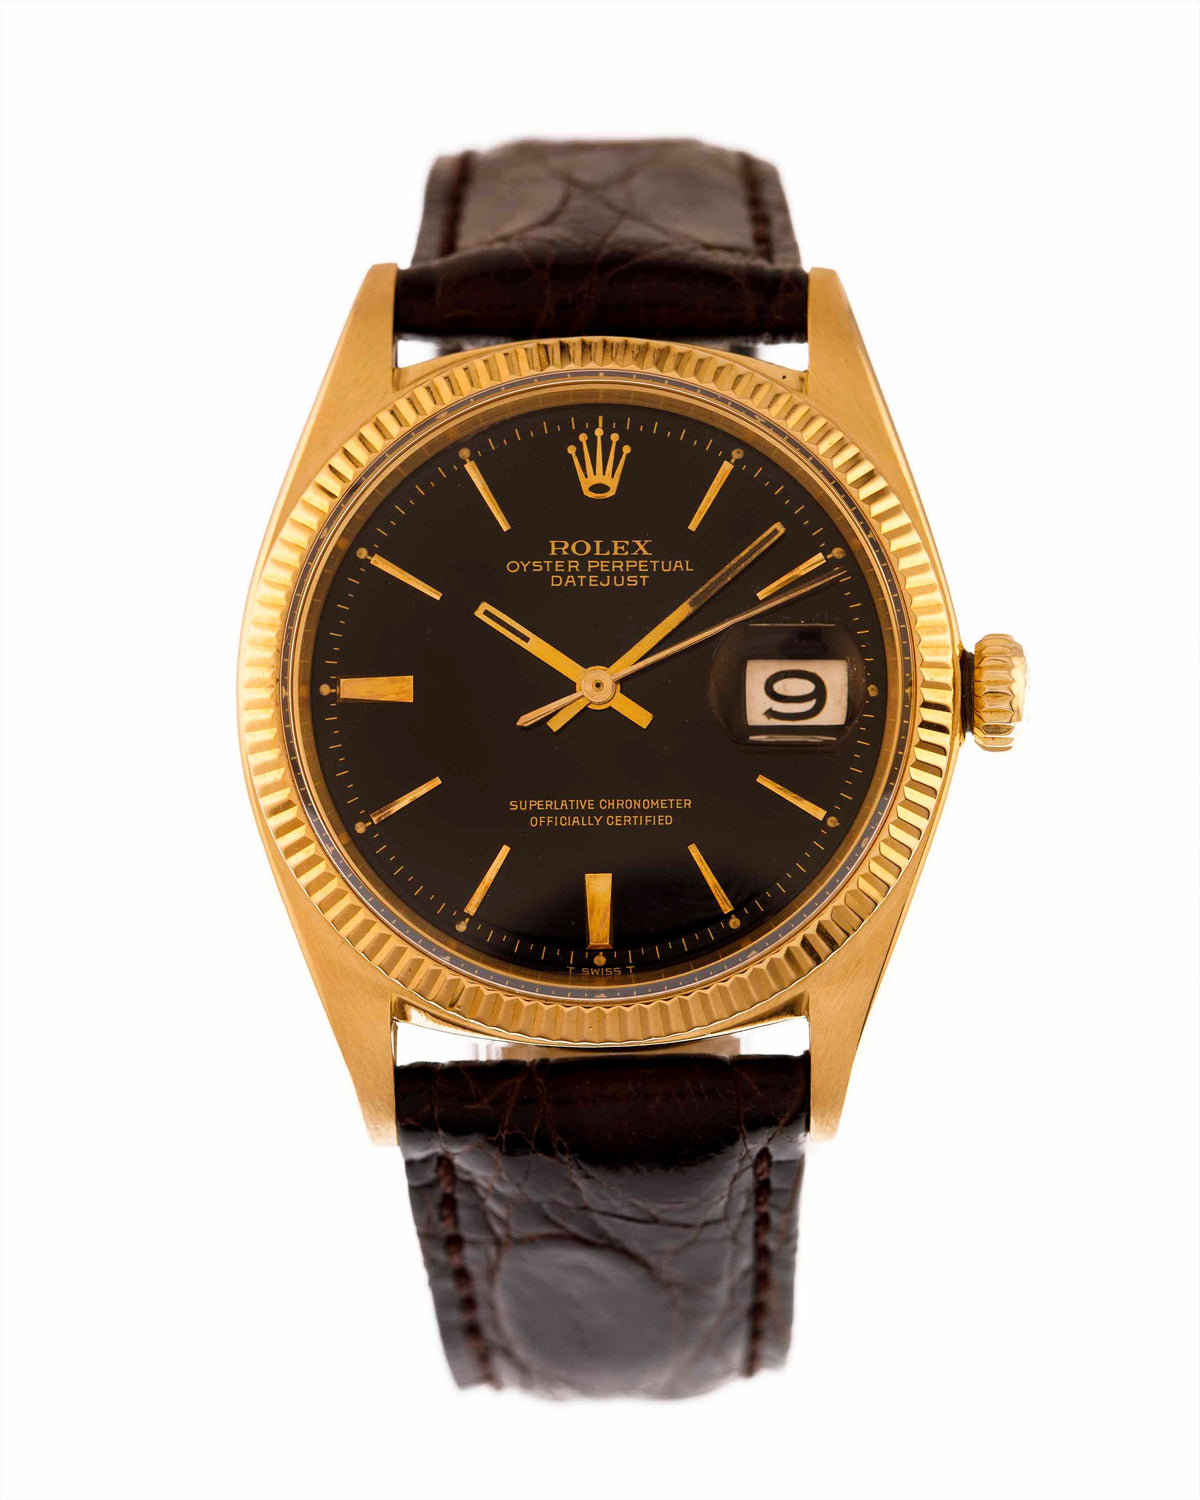 Rolex Oyster Perpetual Date just gilt dial